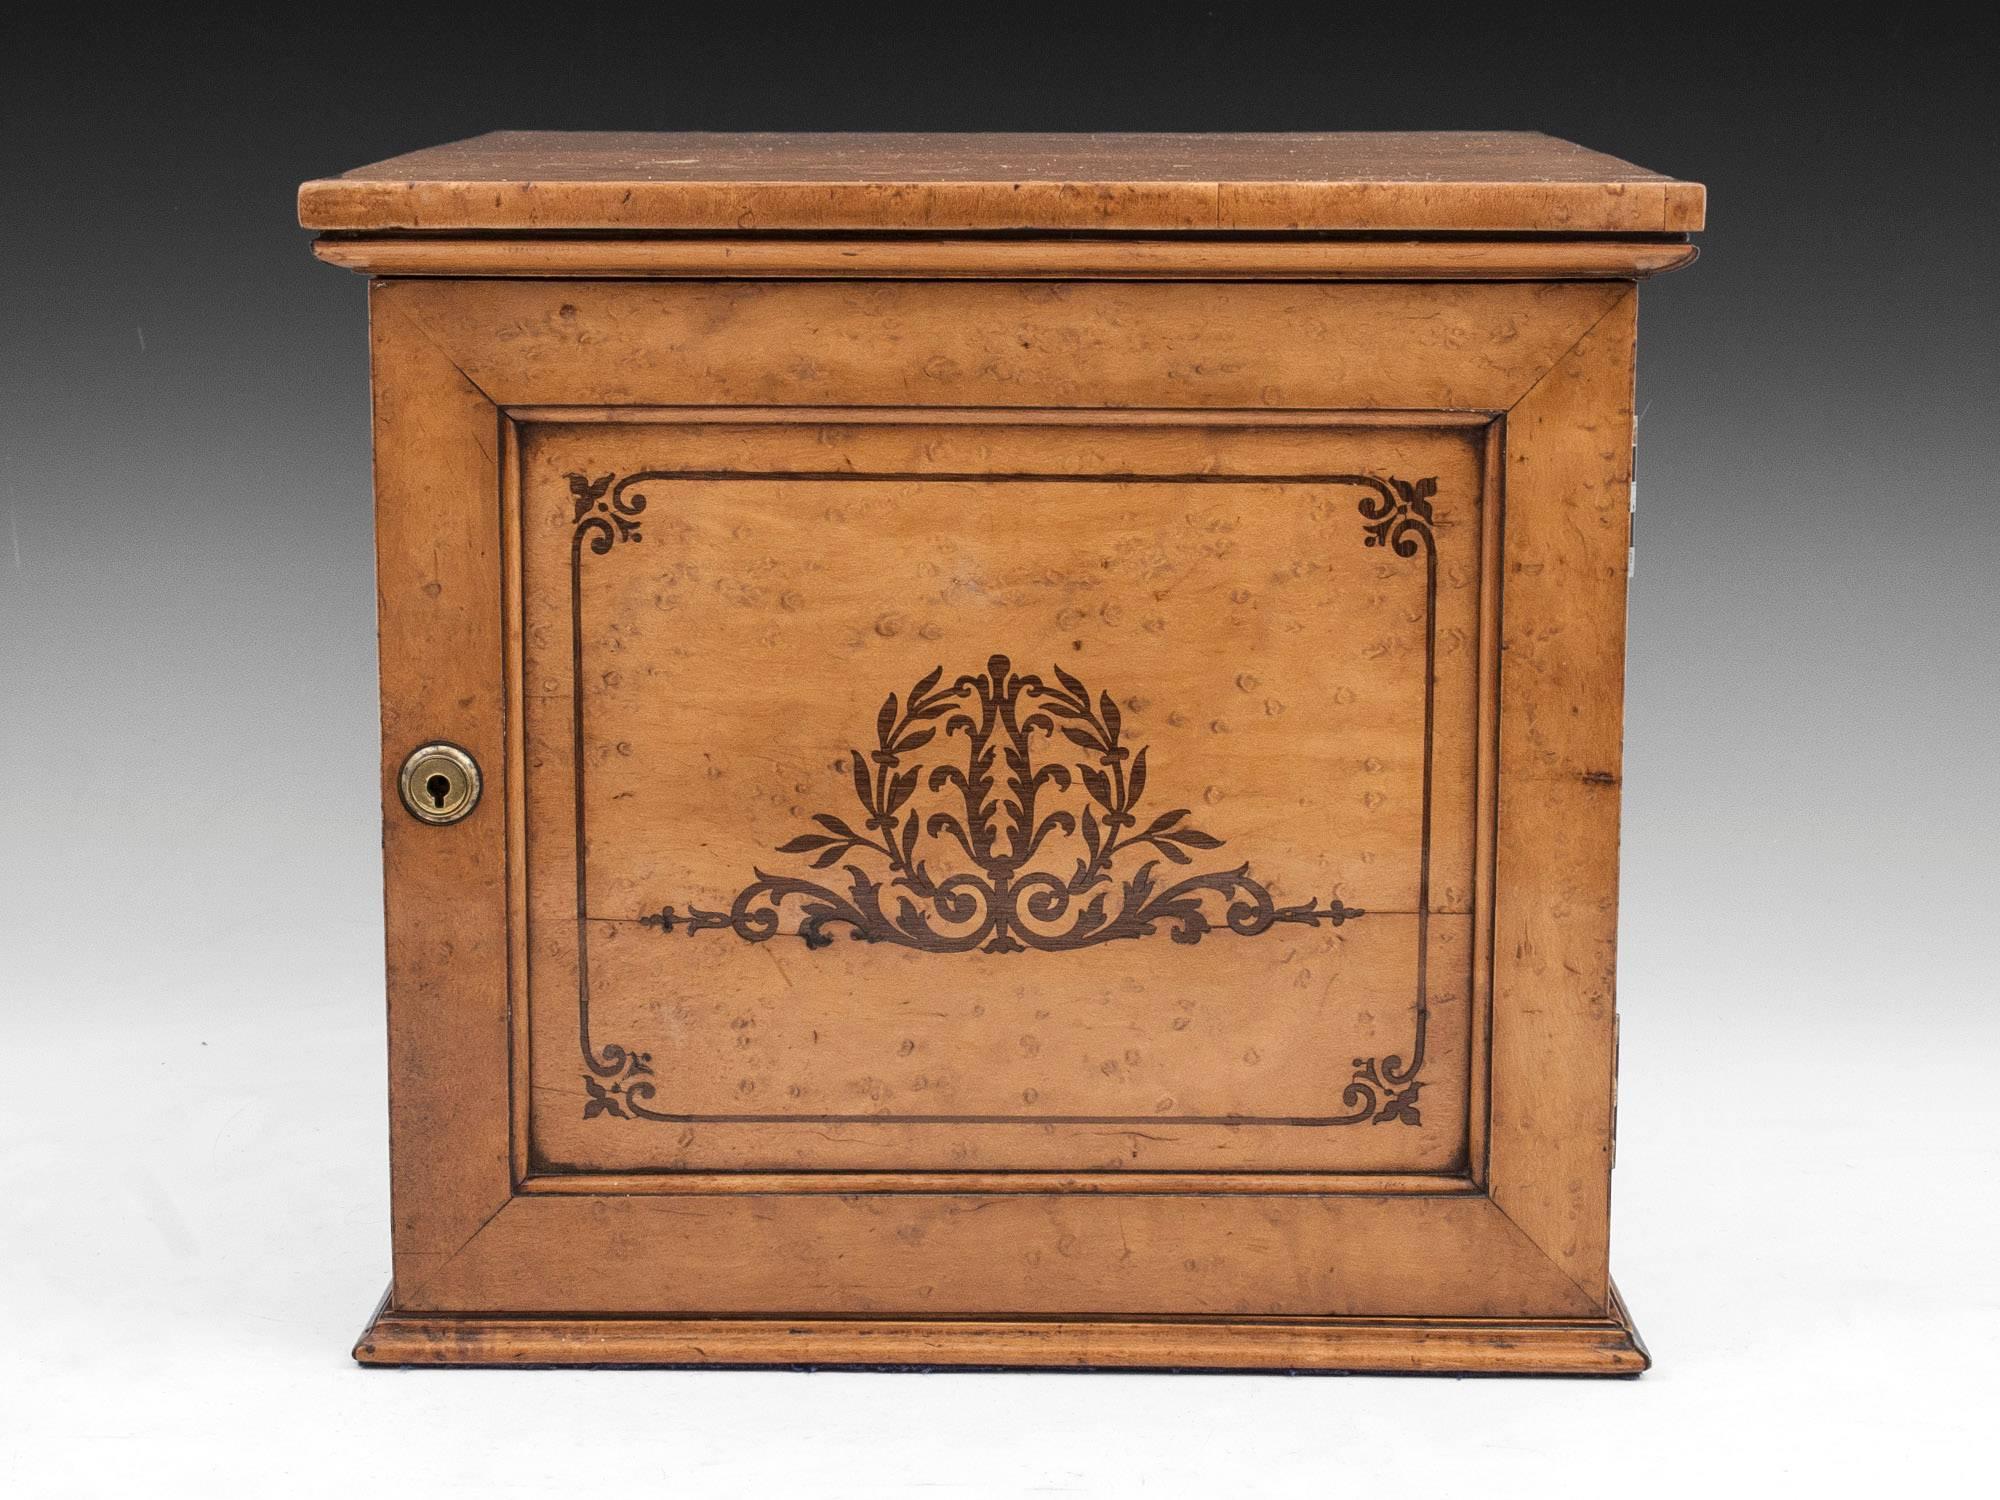 Stunning bird’s-eye maple cigar cabinet with brass escutcheon and flush carry handles. 

The interior contains three mahogany drawers each beautifully constructed using dovetail joints, the fronts having unusual brass handles and removable